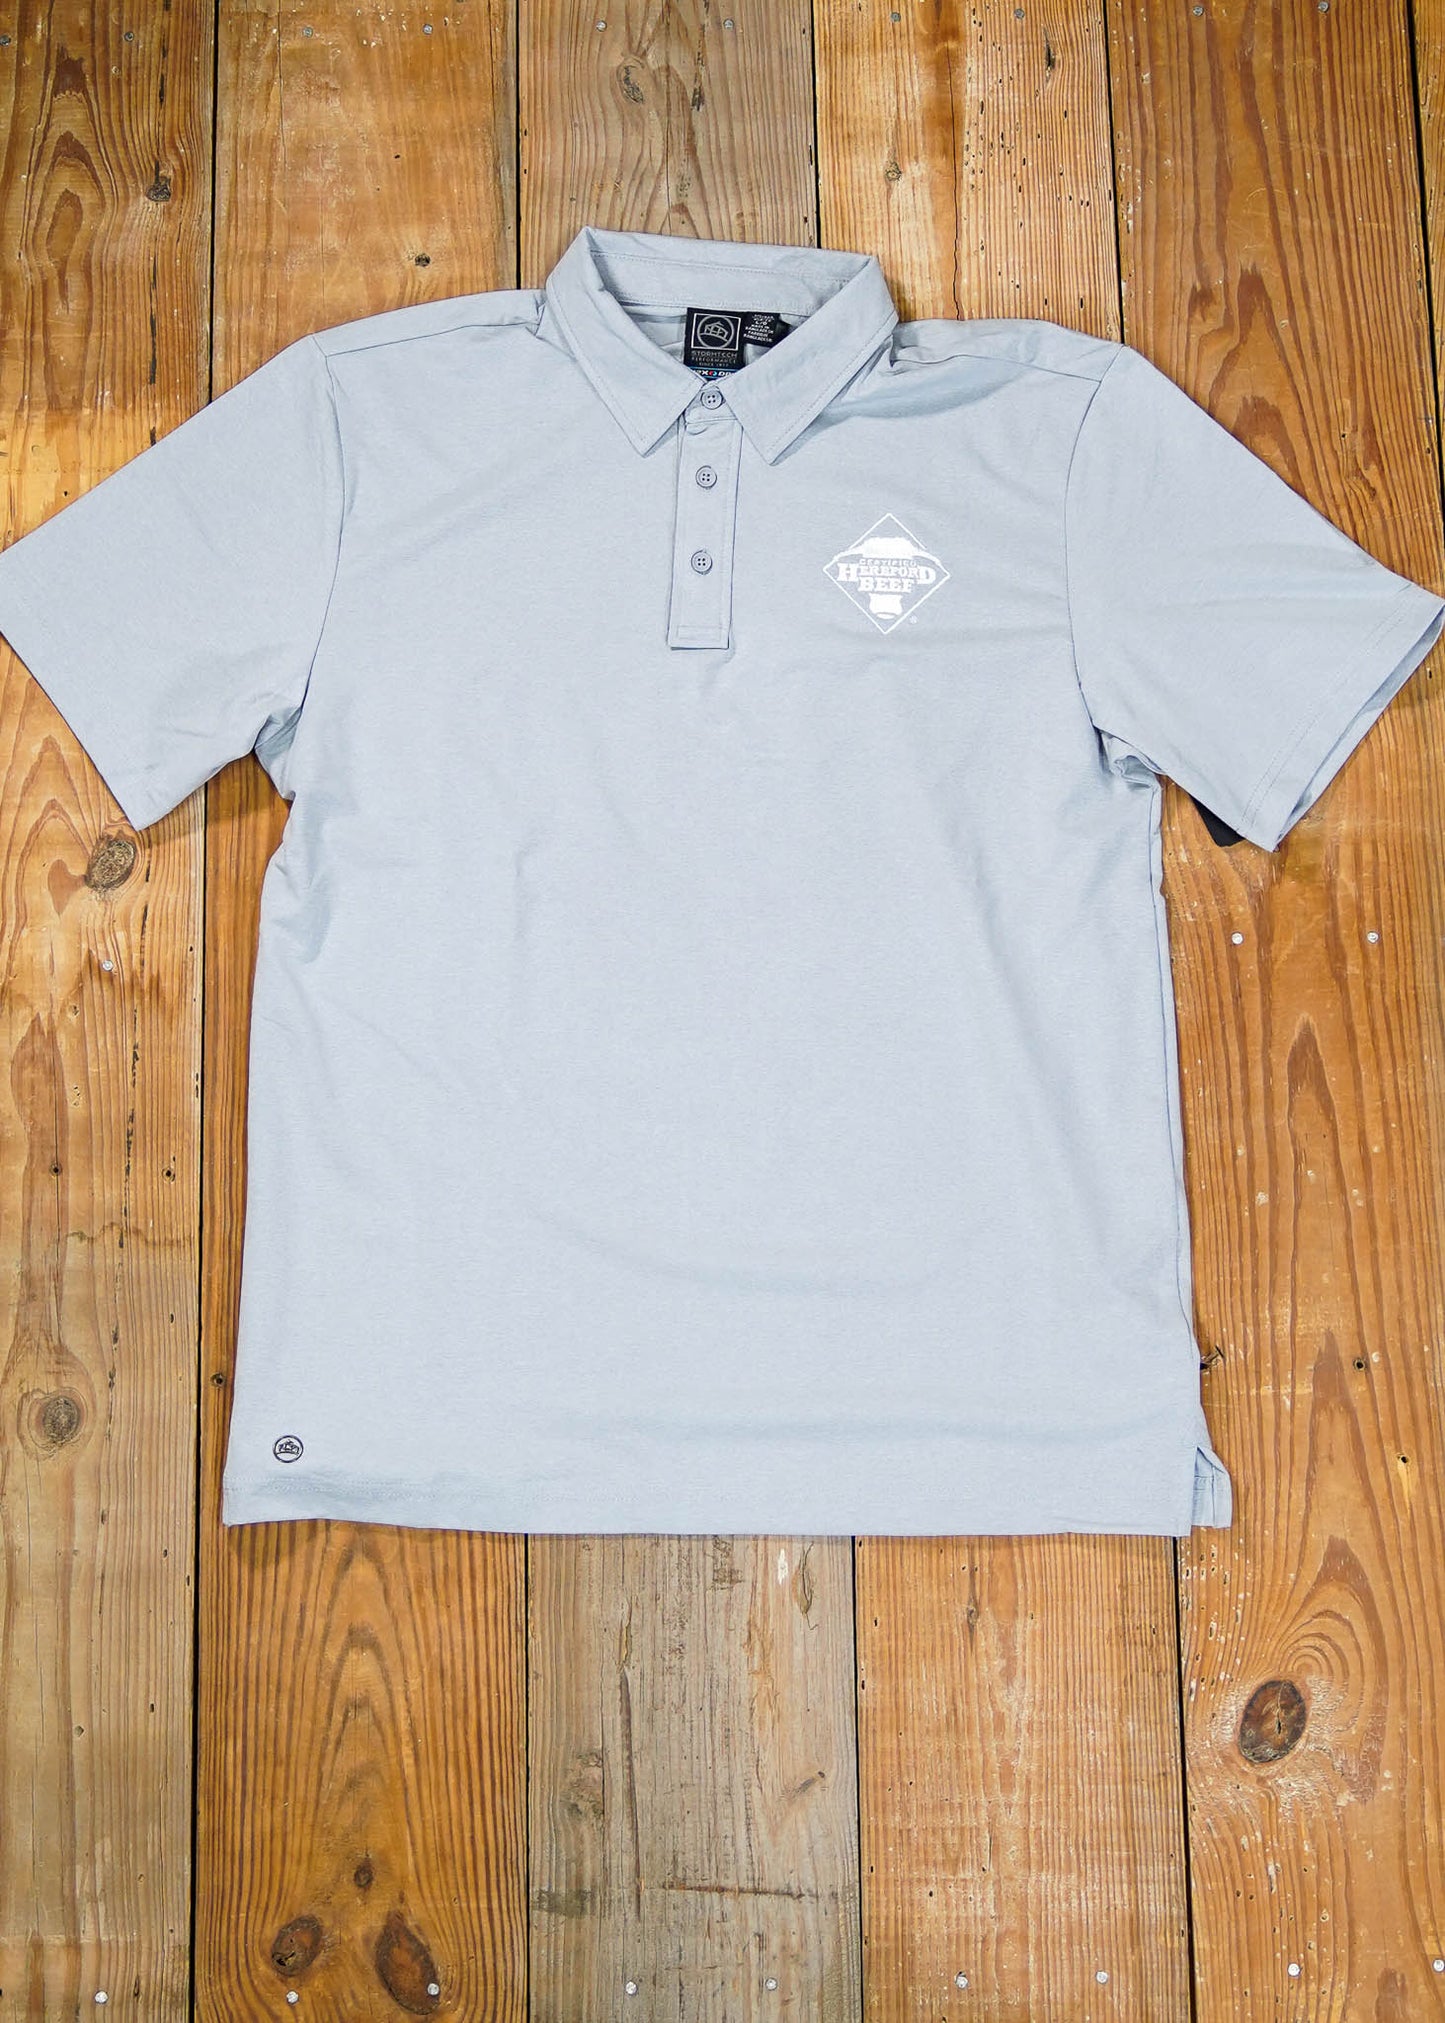 Certified Hereford Beef Men's Polo Shirt - Cool Silver